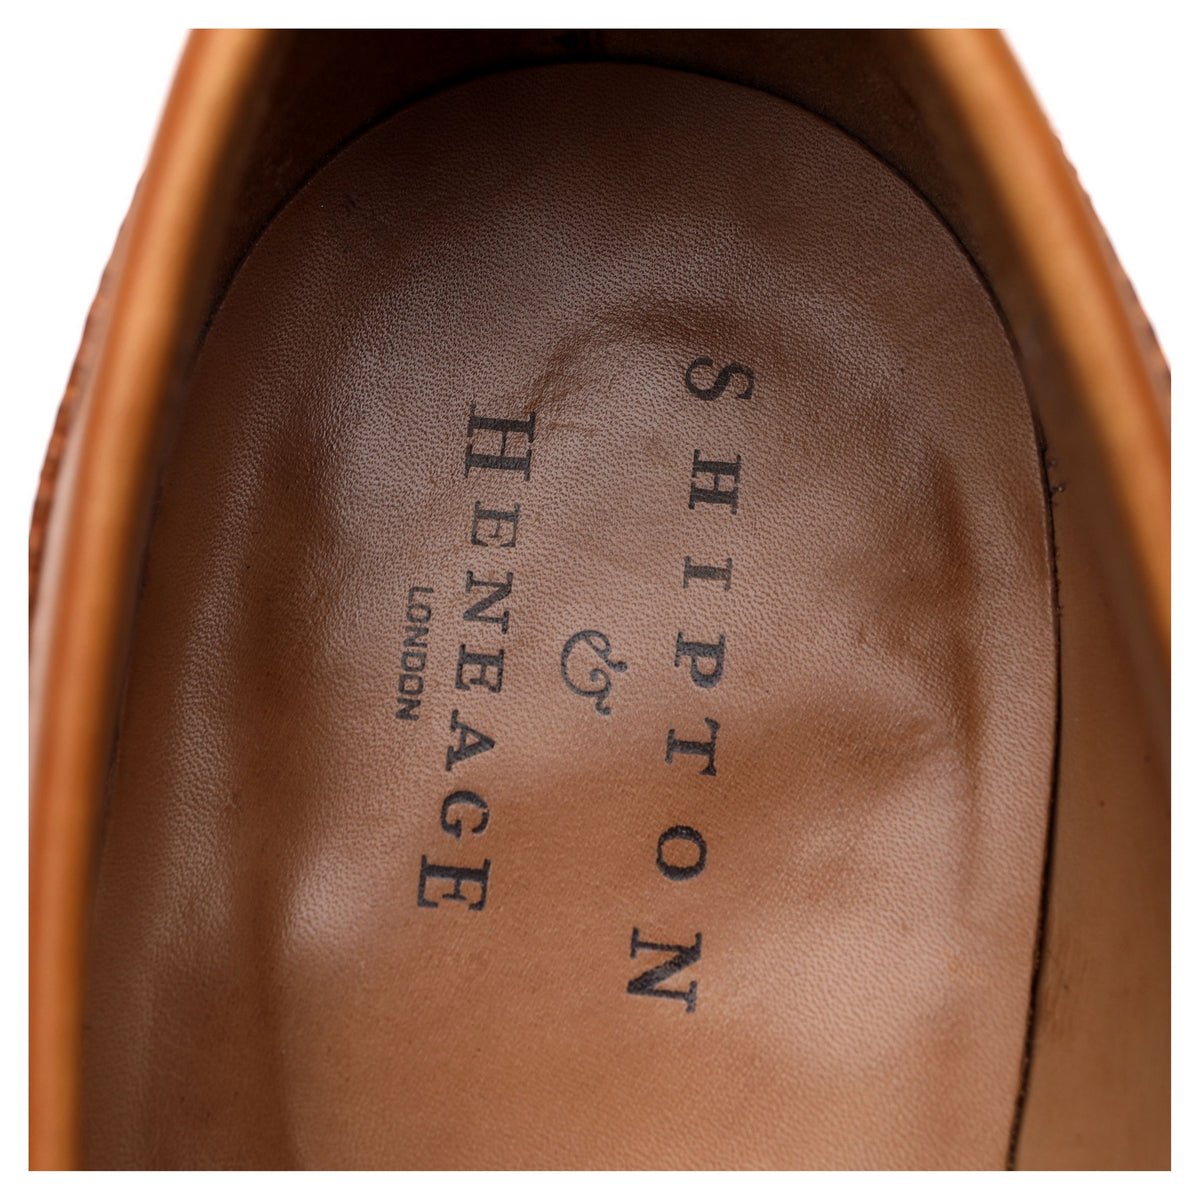 Shipton &amp; Heneage &#39;Burghley&#39; Tan Brown Leather Loafers UK 10.5 EX